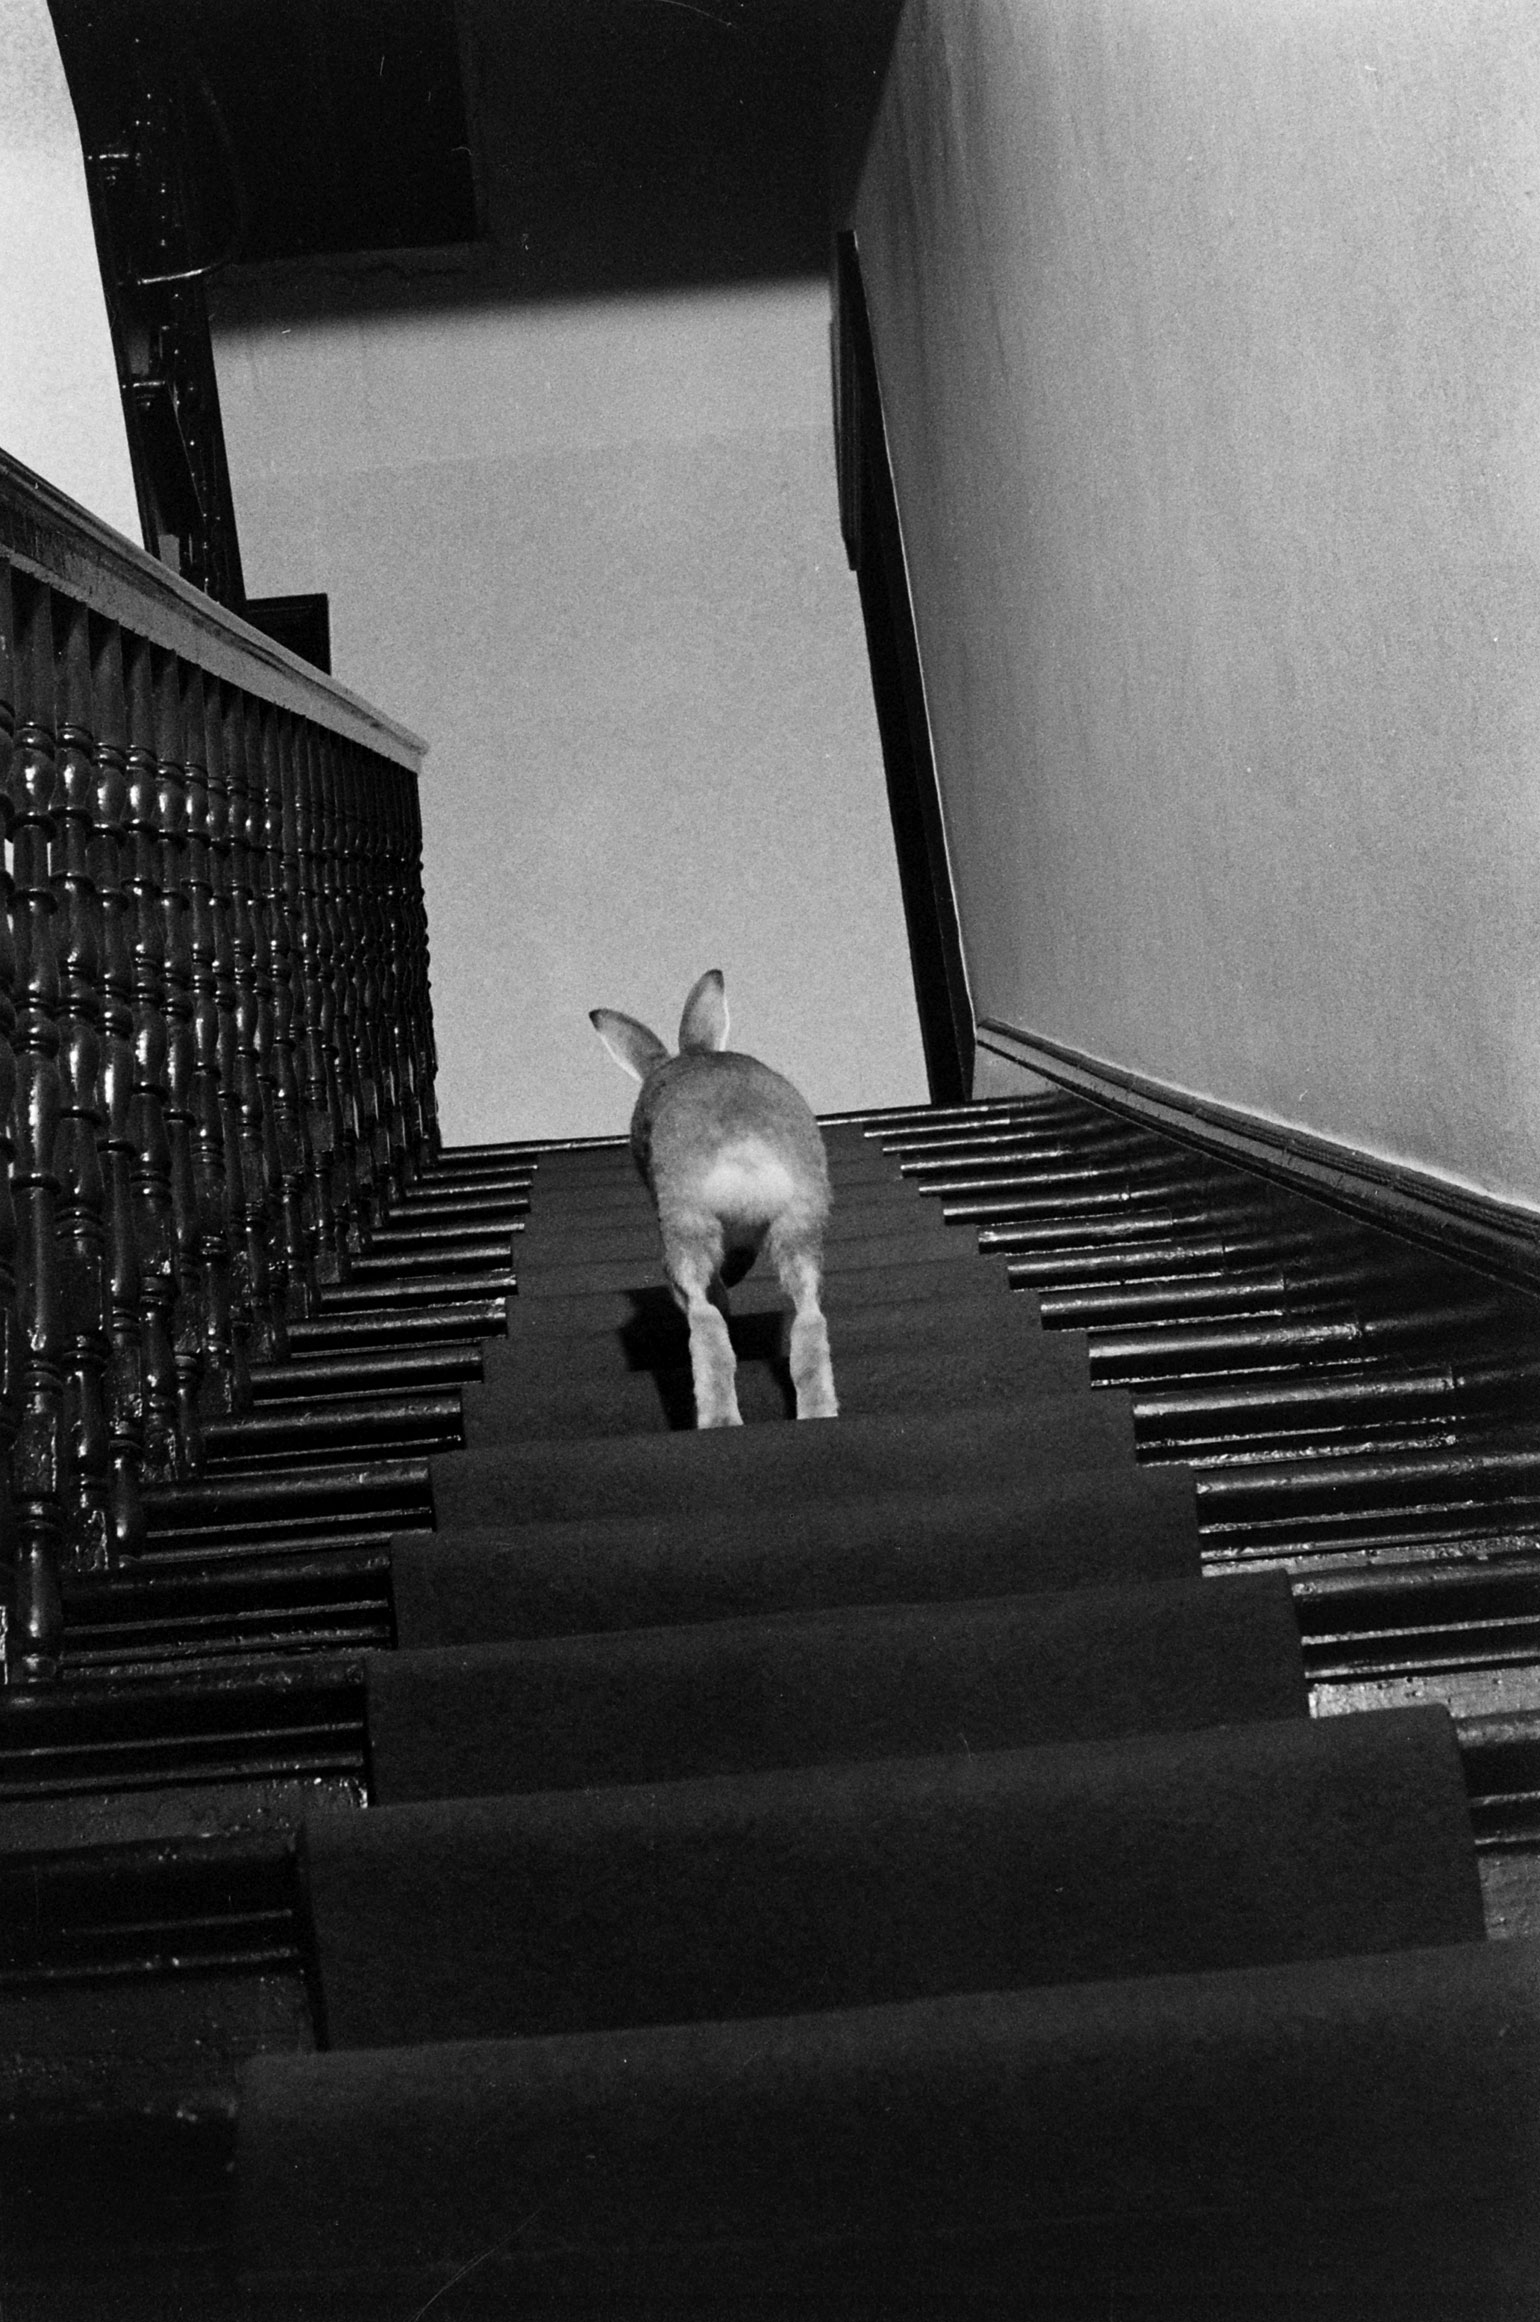 Horace the Irish hare navigates the stairs in home of Cecil S. Webb, director of the Dublin Zoo, 1956.